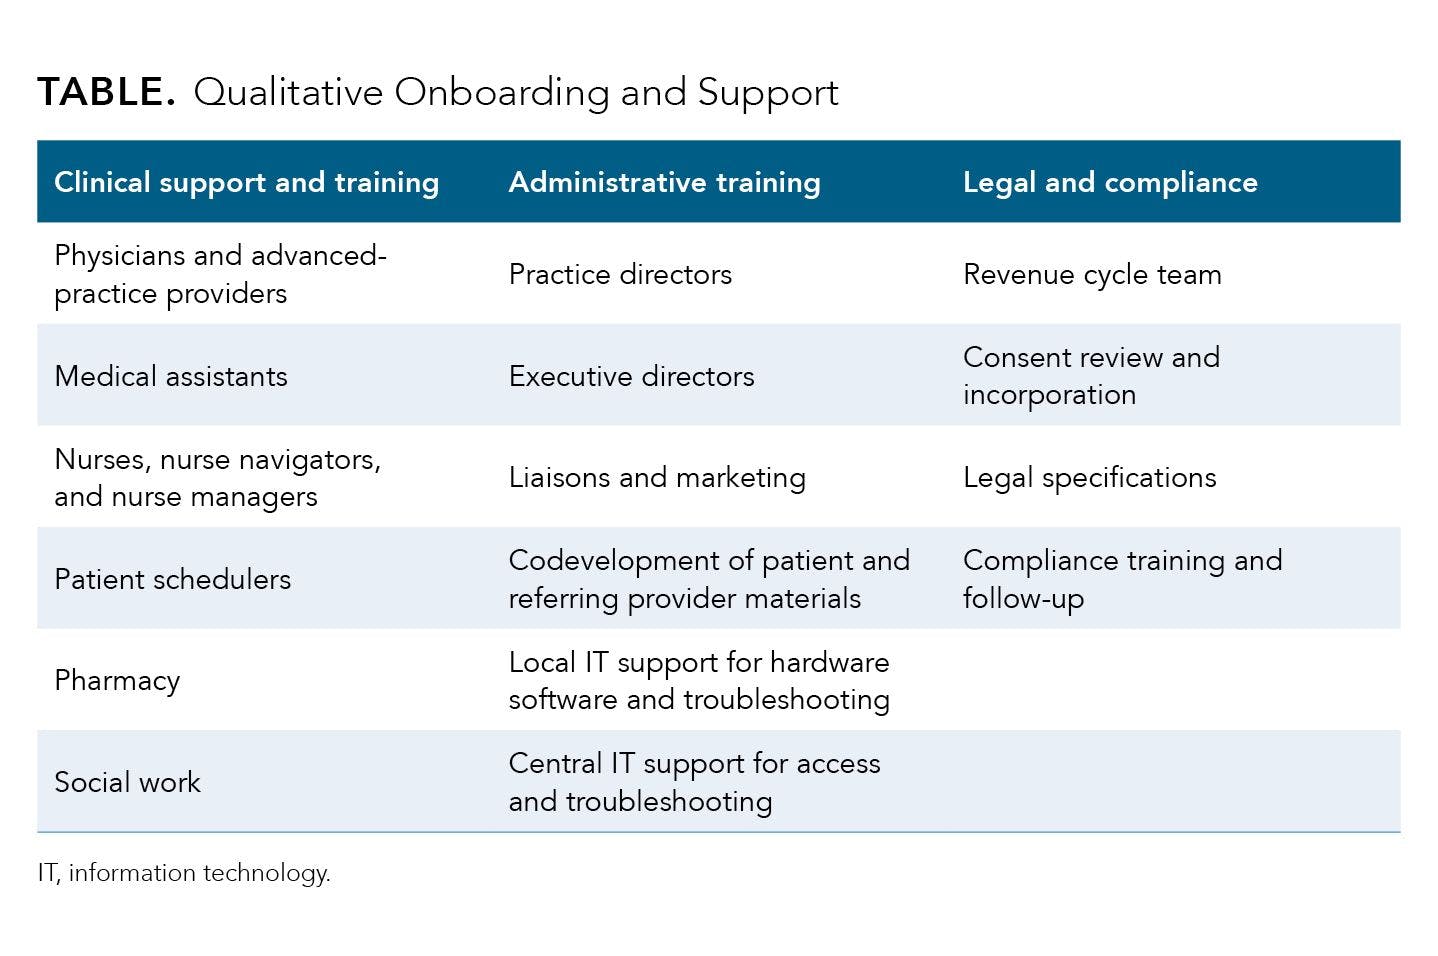 Qualitative Onboarding and Support Table